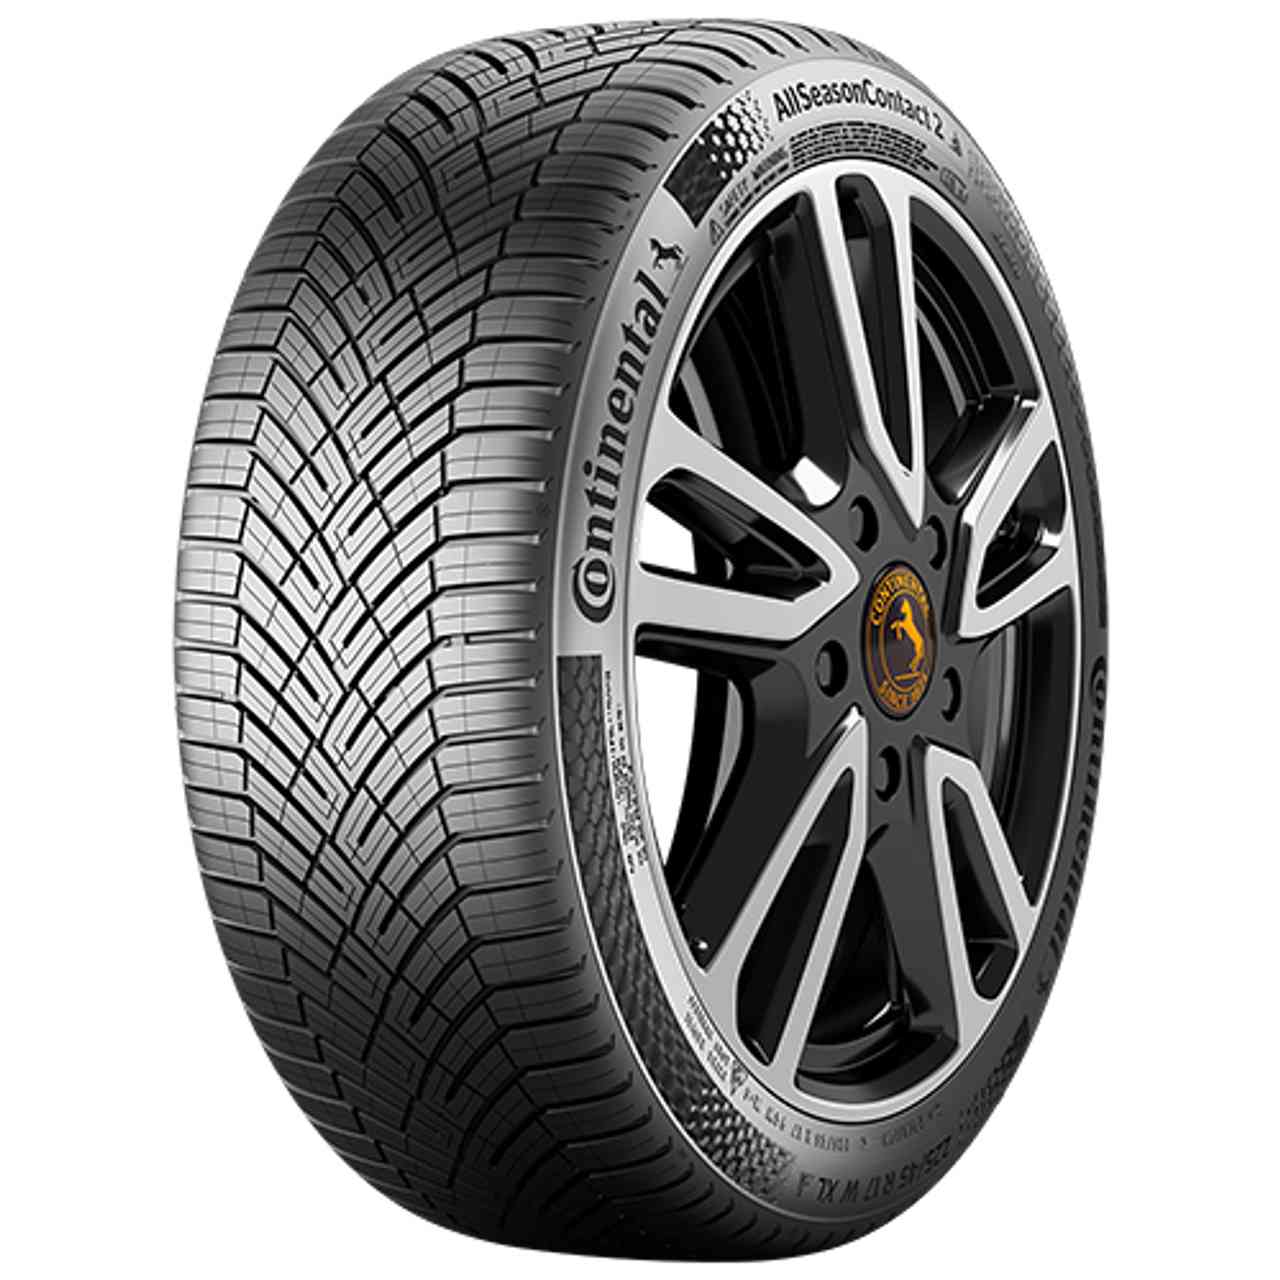 CONTINENTAL ALLSEASONCONTACT 2 (EVc) 205/55R17 95V BSW